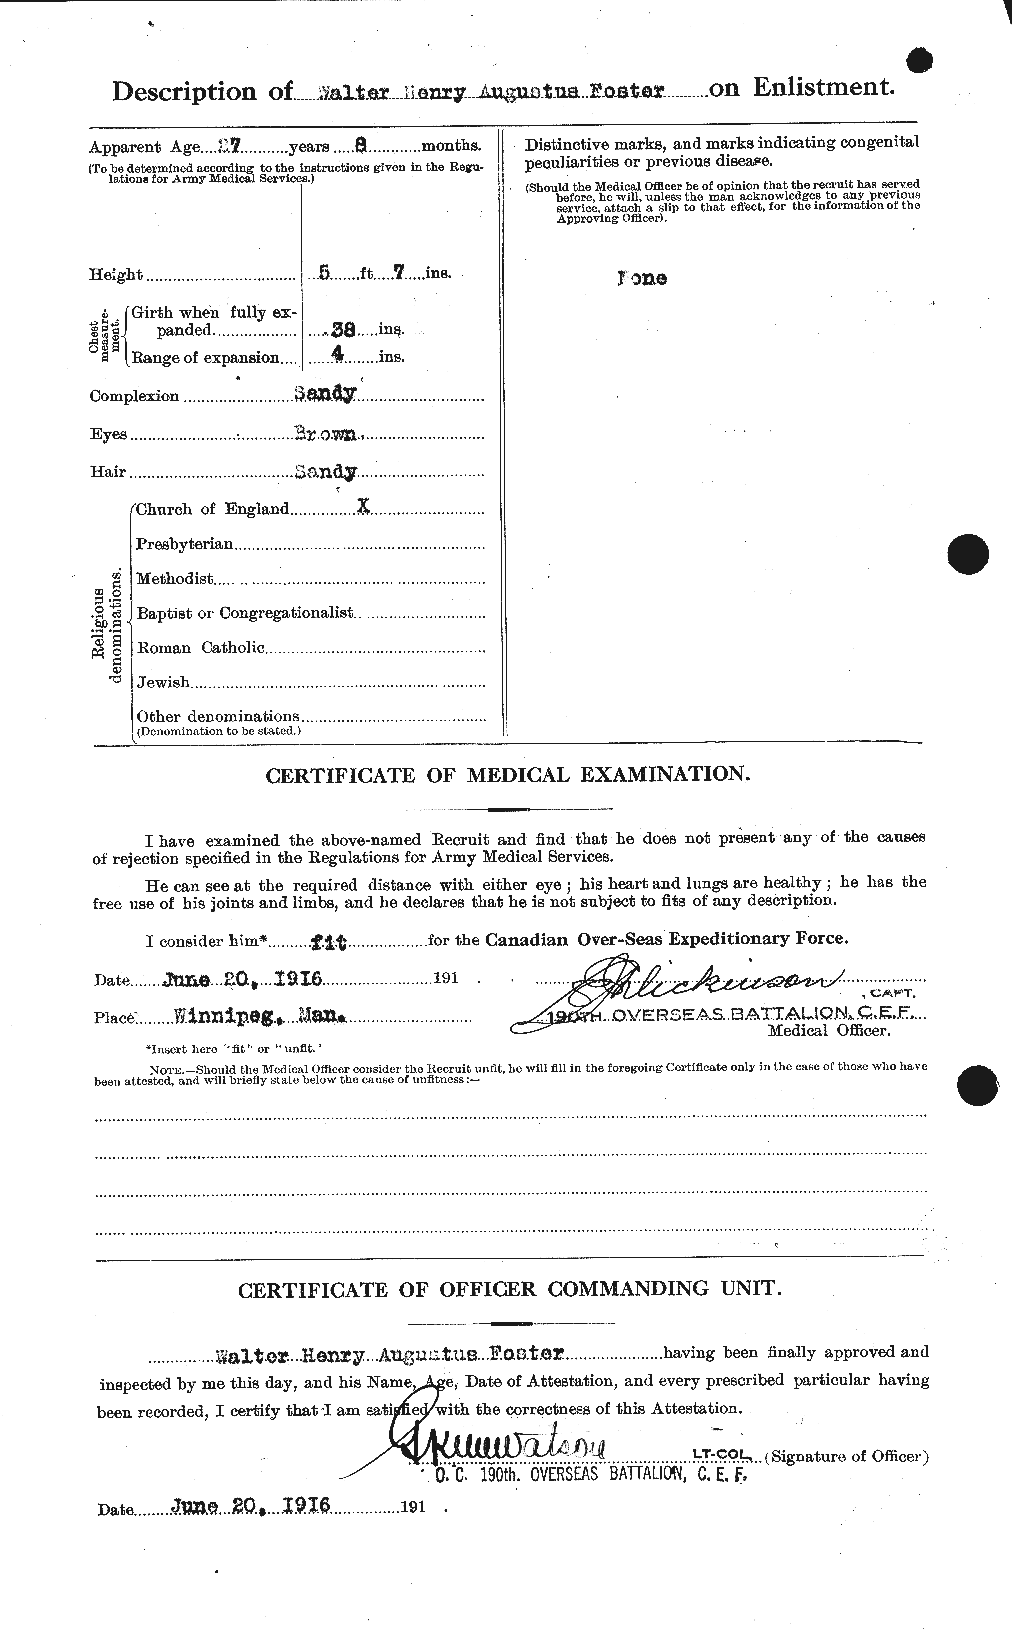 Personnel Records of the First World War - CEF 335258b